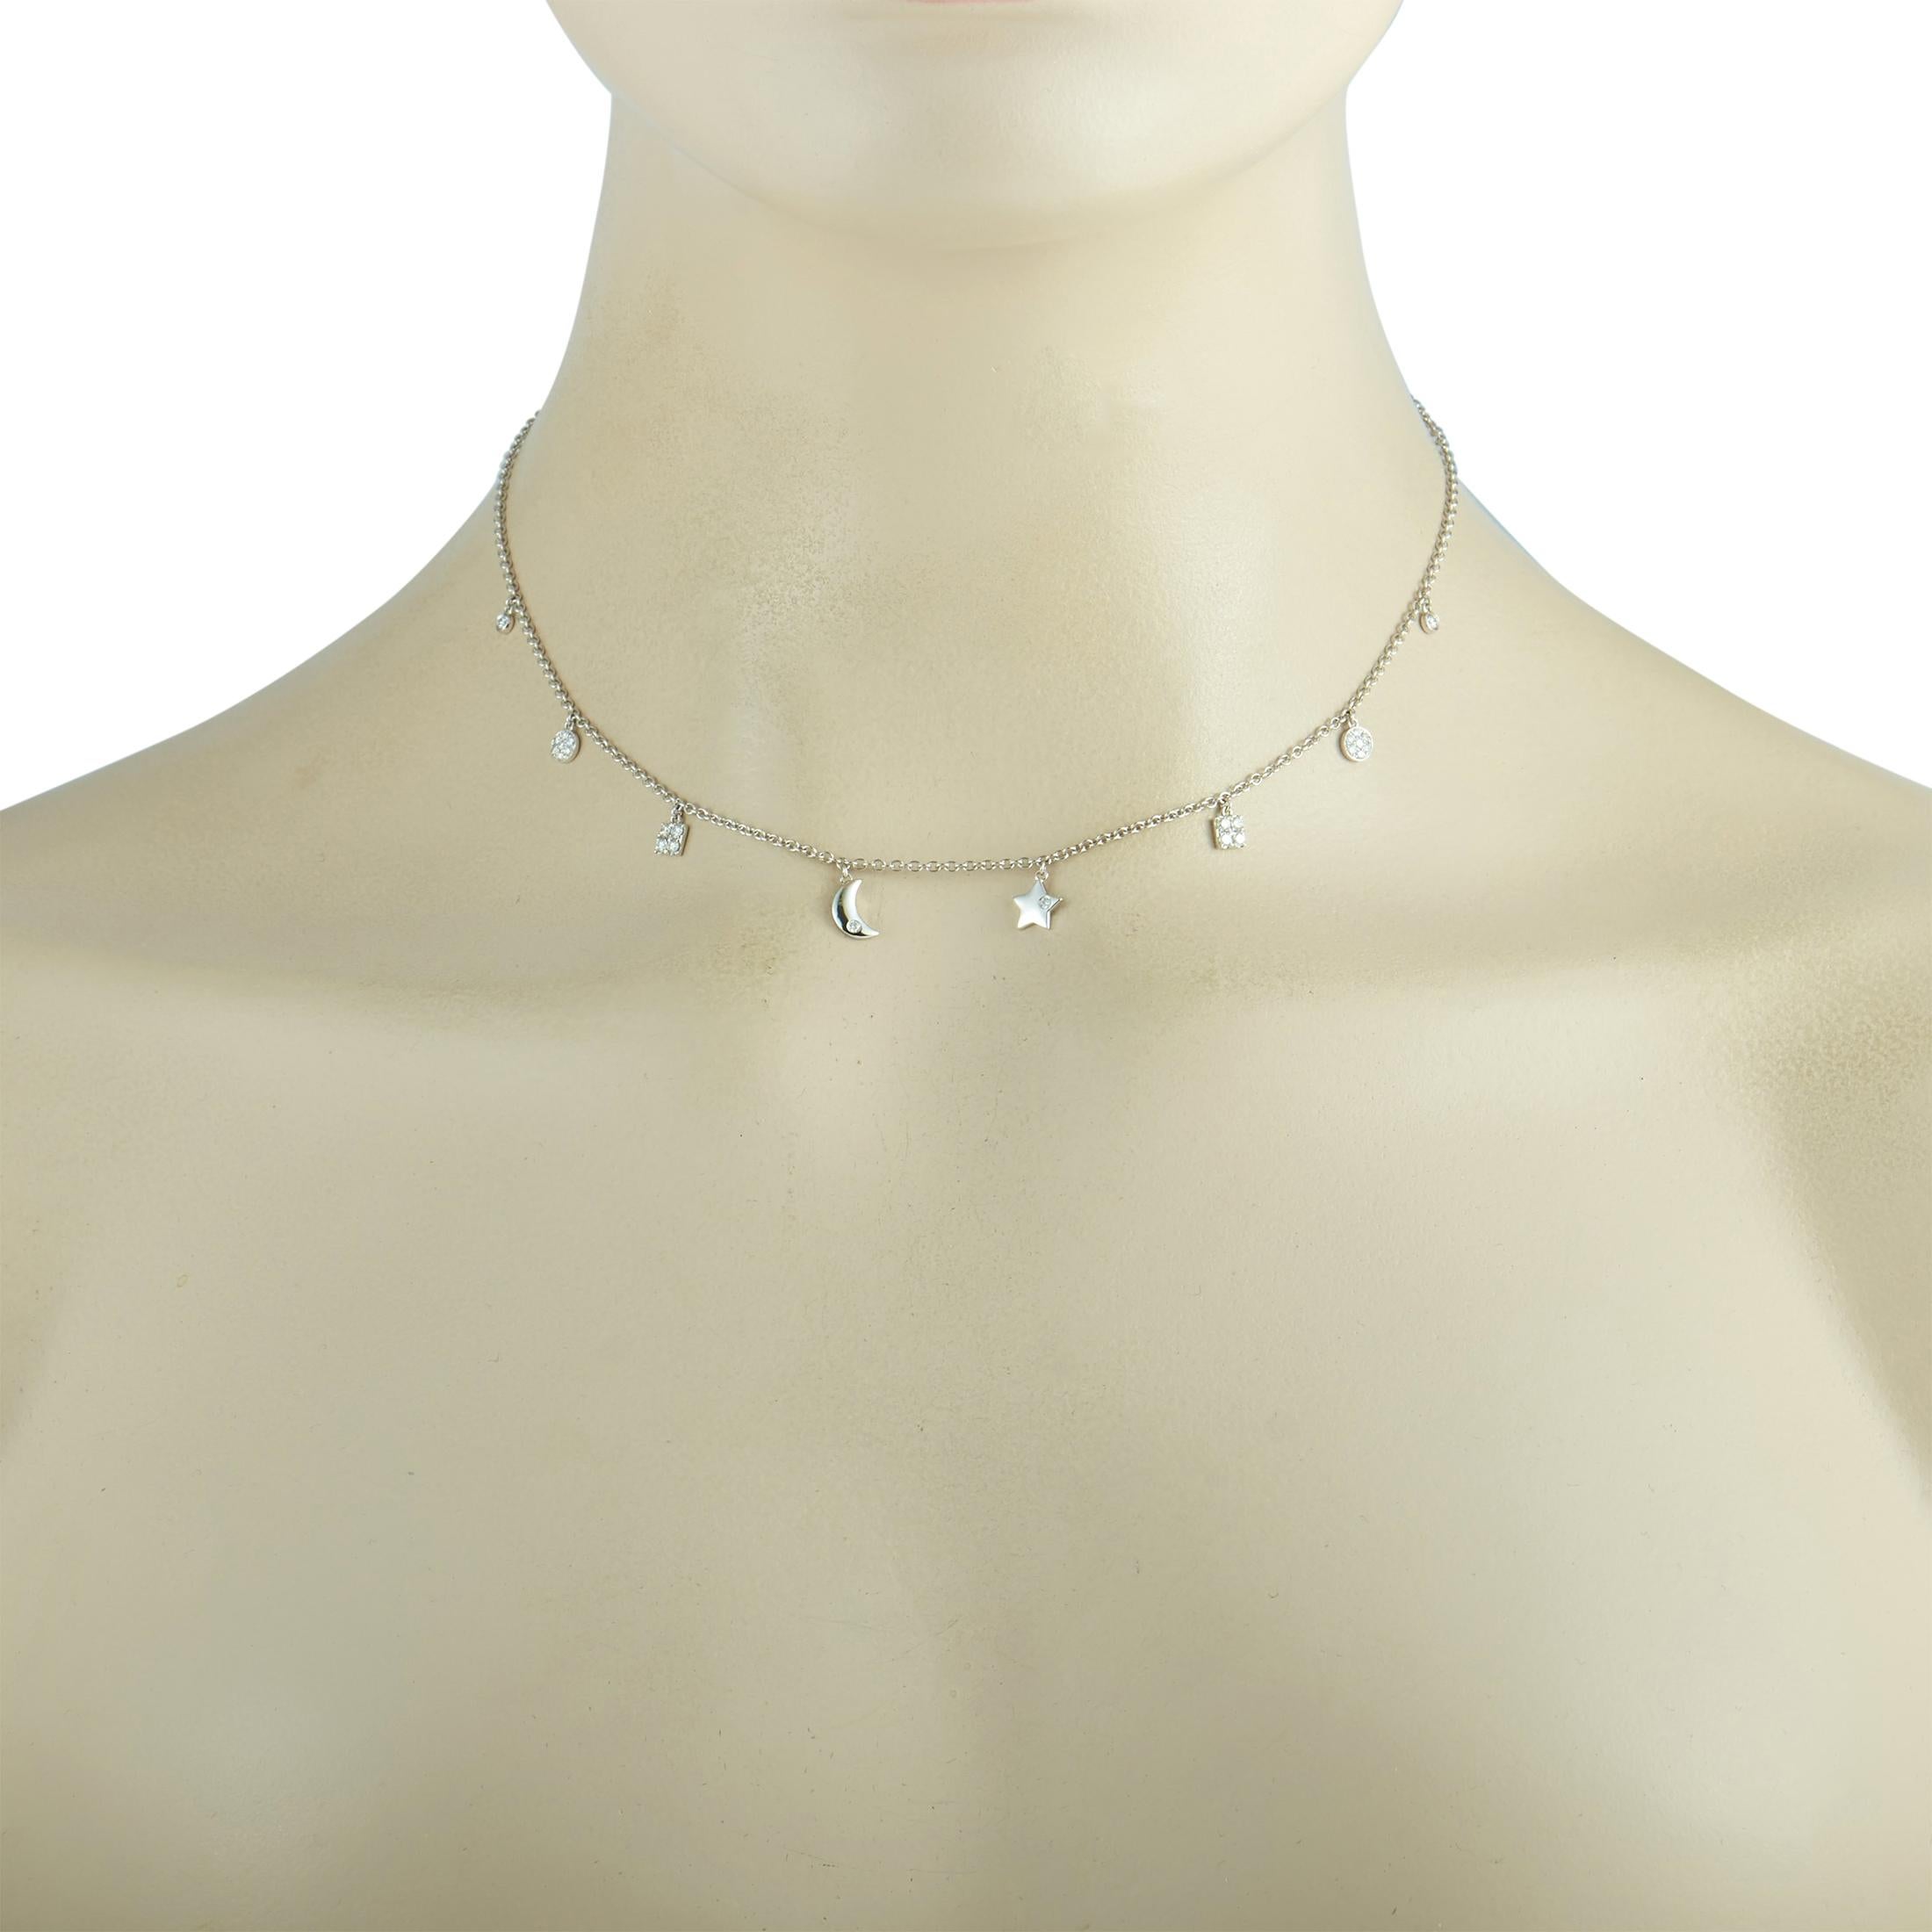 This LB Exclusive necklace is crafted from 18K white gold and weighs 4.4 grams, measuring 15” in length. The necklace is set with diamonds that total 0.50 carats.
 
 Offered in brand new condition, this jewelry piece includes a gift box.